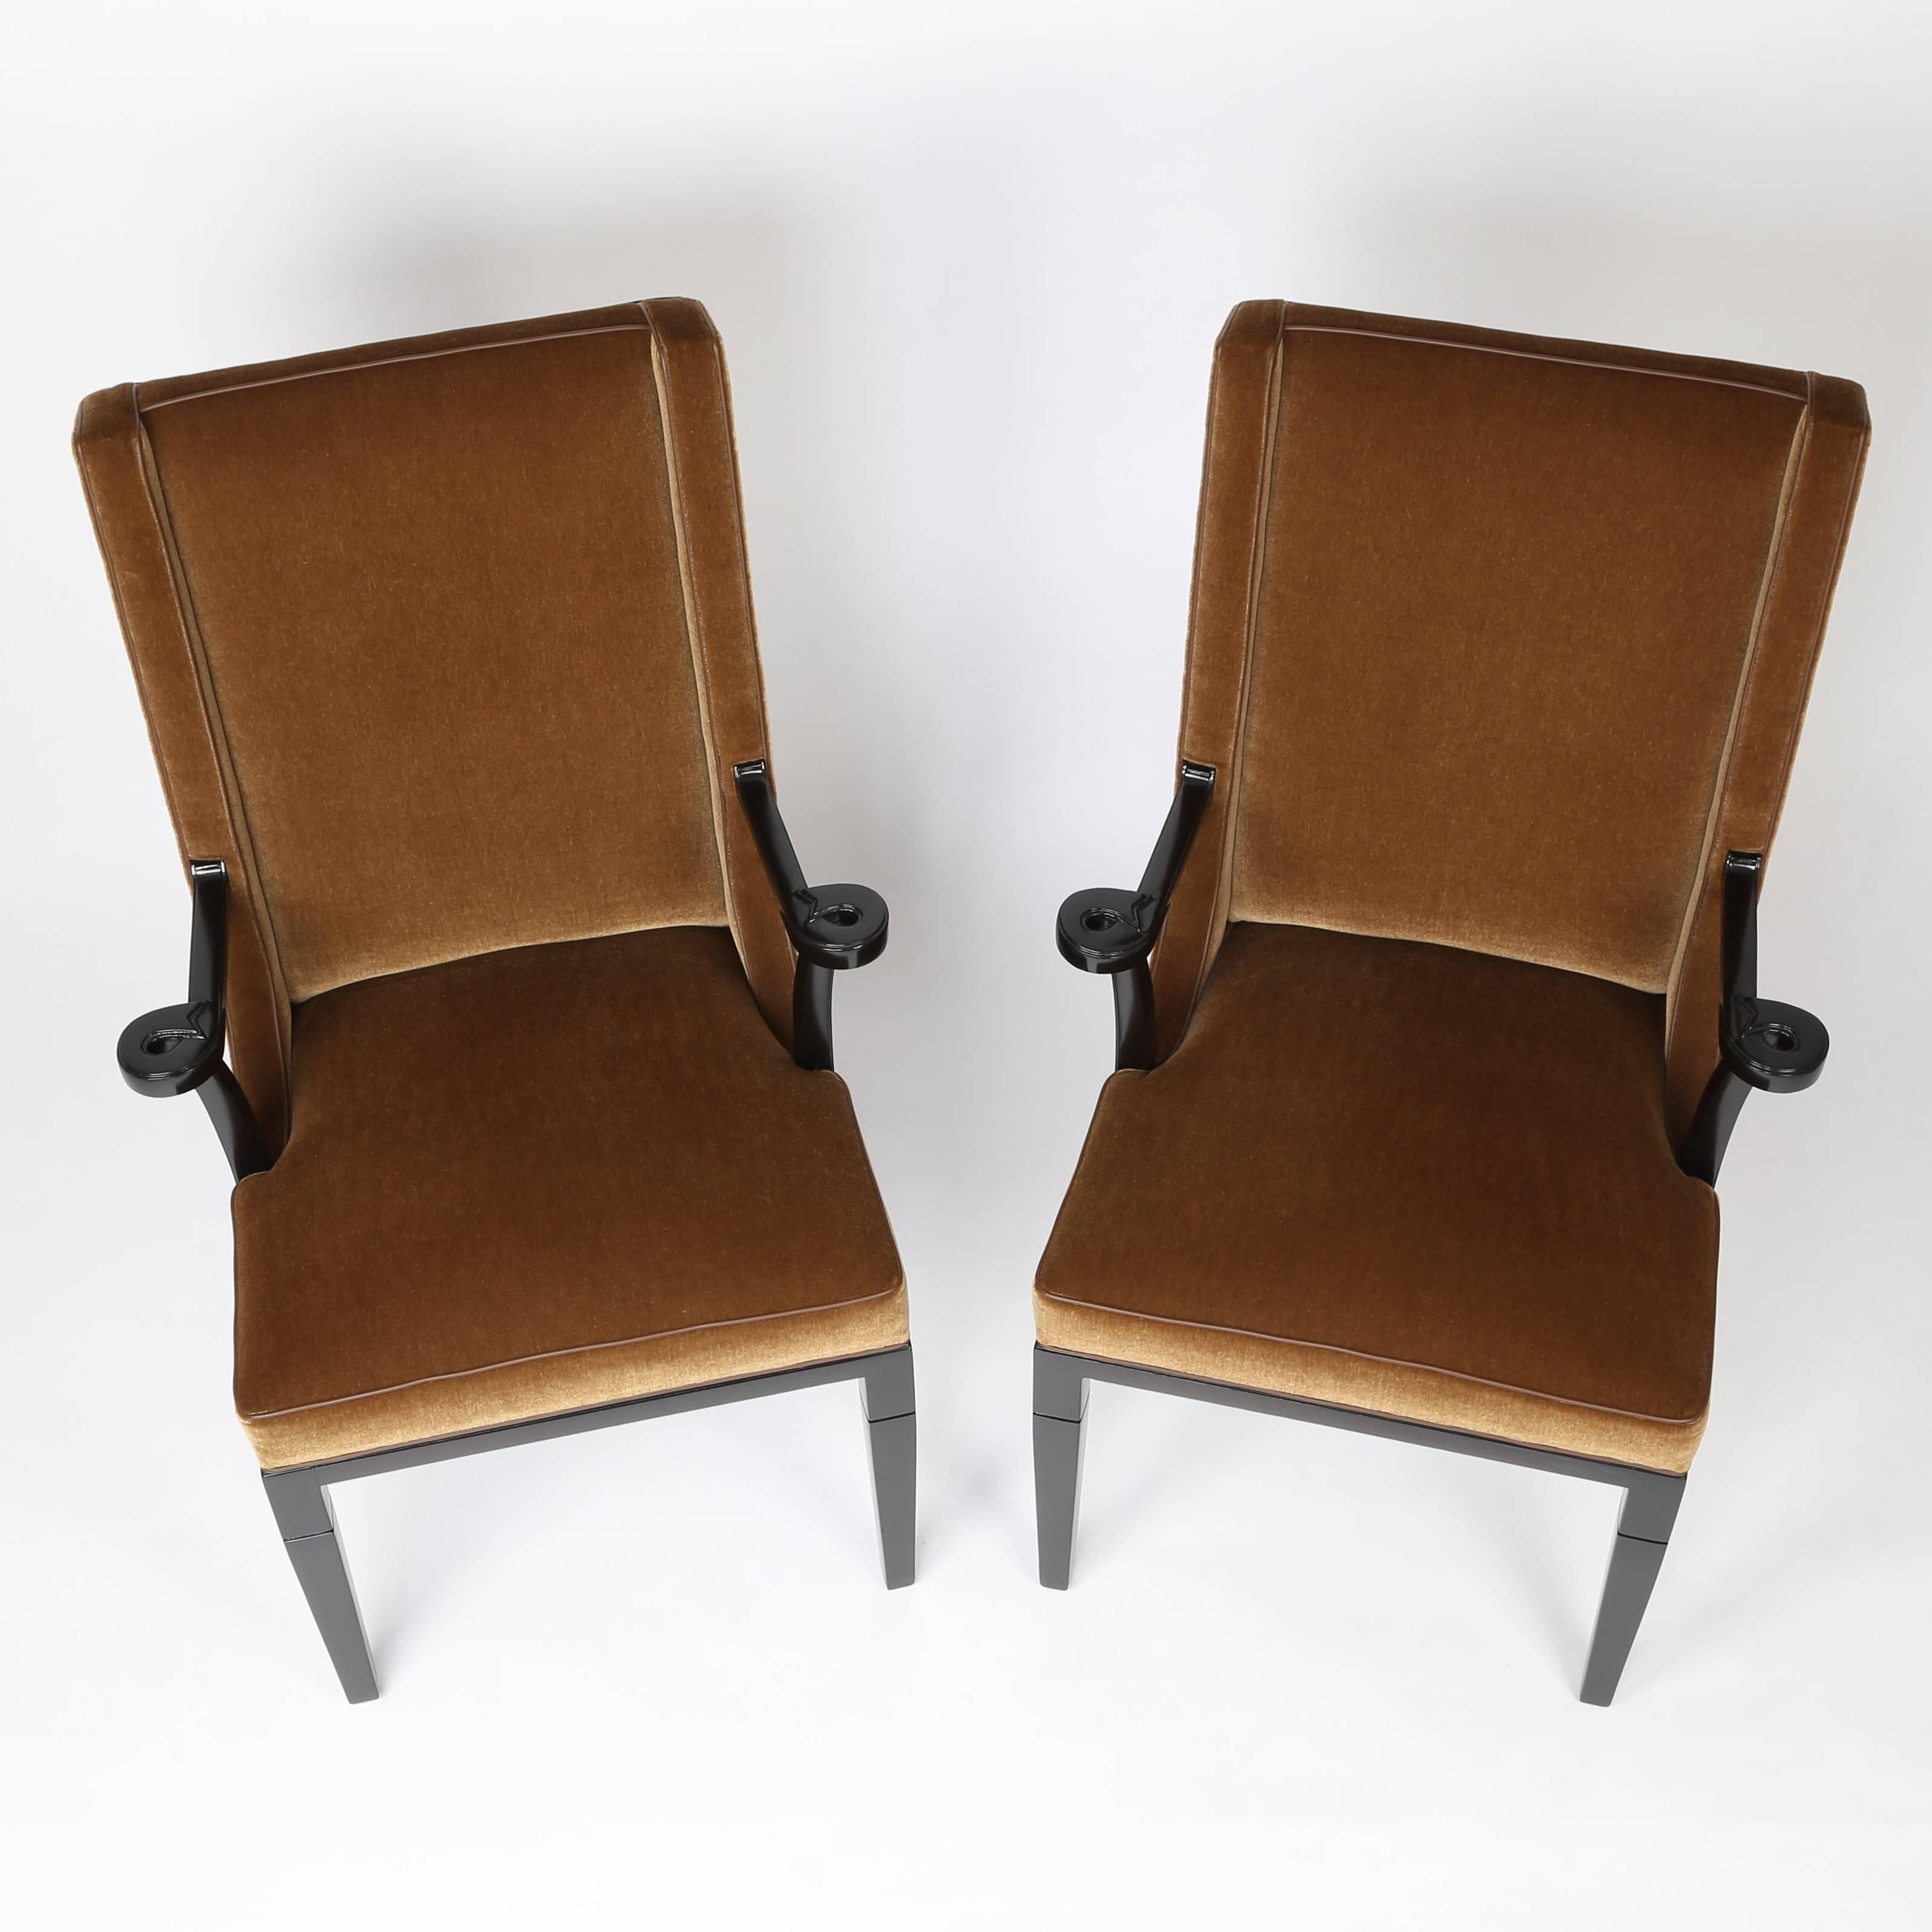 American Pair of Armchairs by Tommi Parzinger for Charak Modern, circa 1940s For Sale